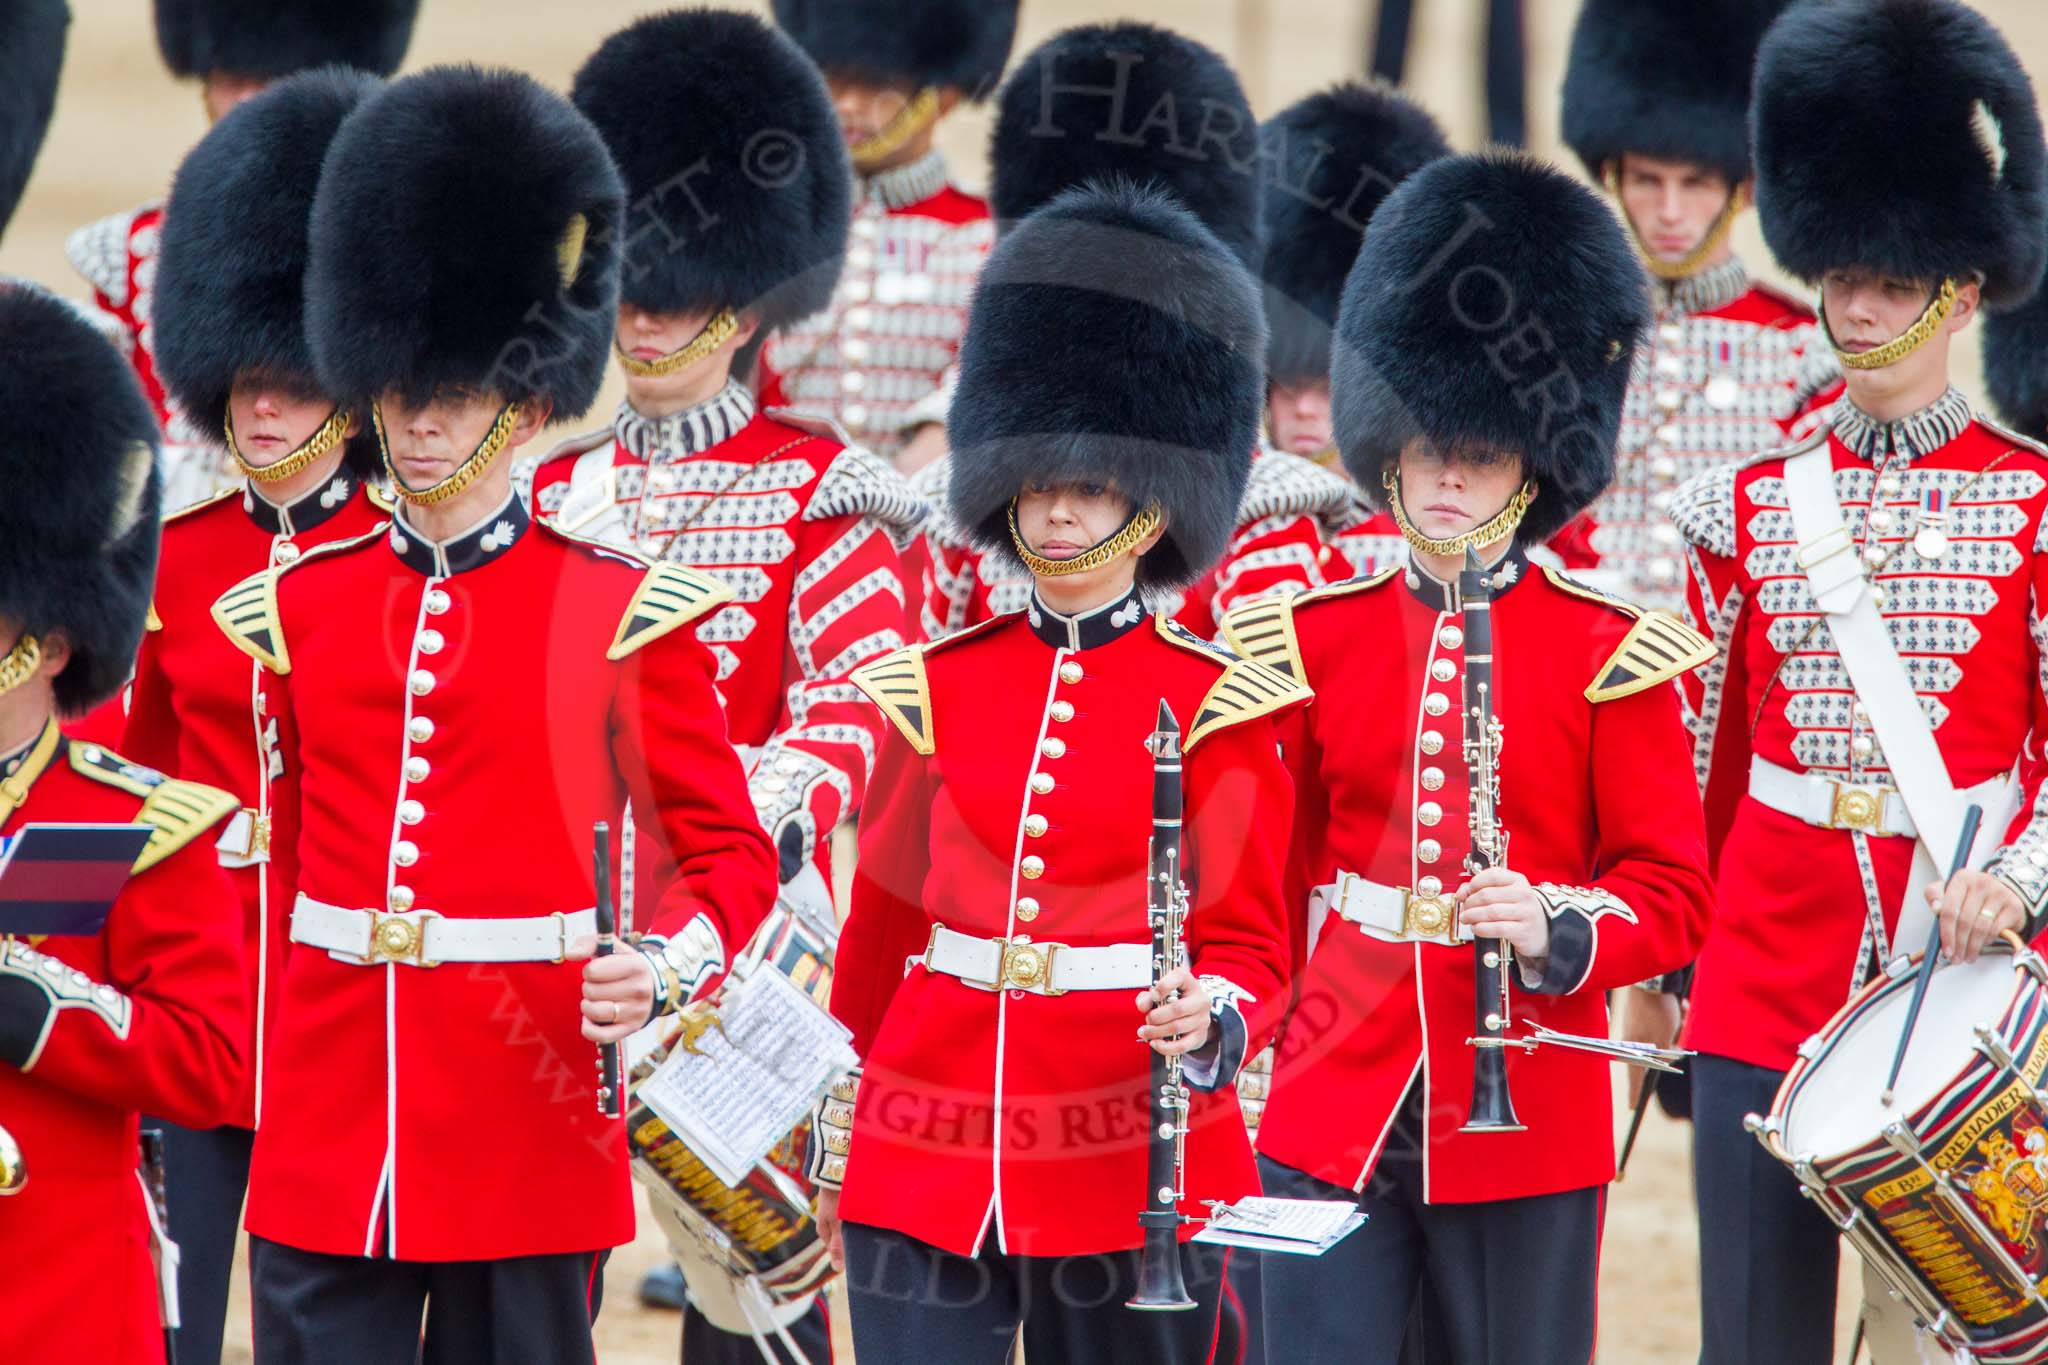 Trooping the Colour 2014.
Horse Guards Parade, Westminster,
London SW1A,

United Kingdom,
on 14 June 2014 at 10:31, image #190